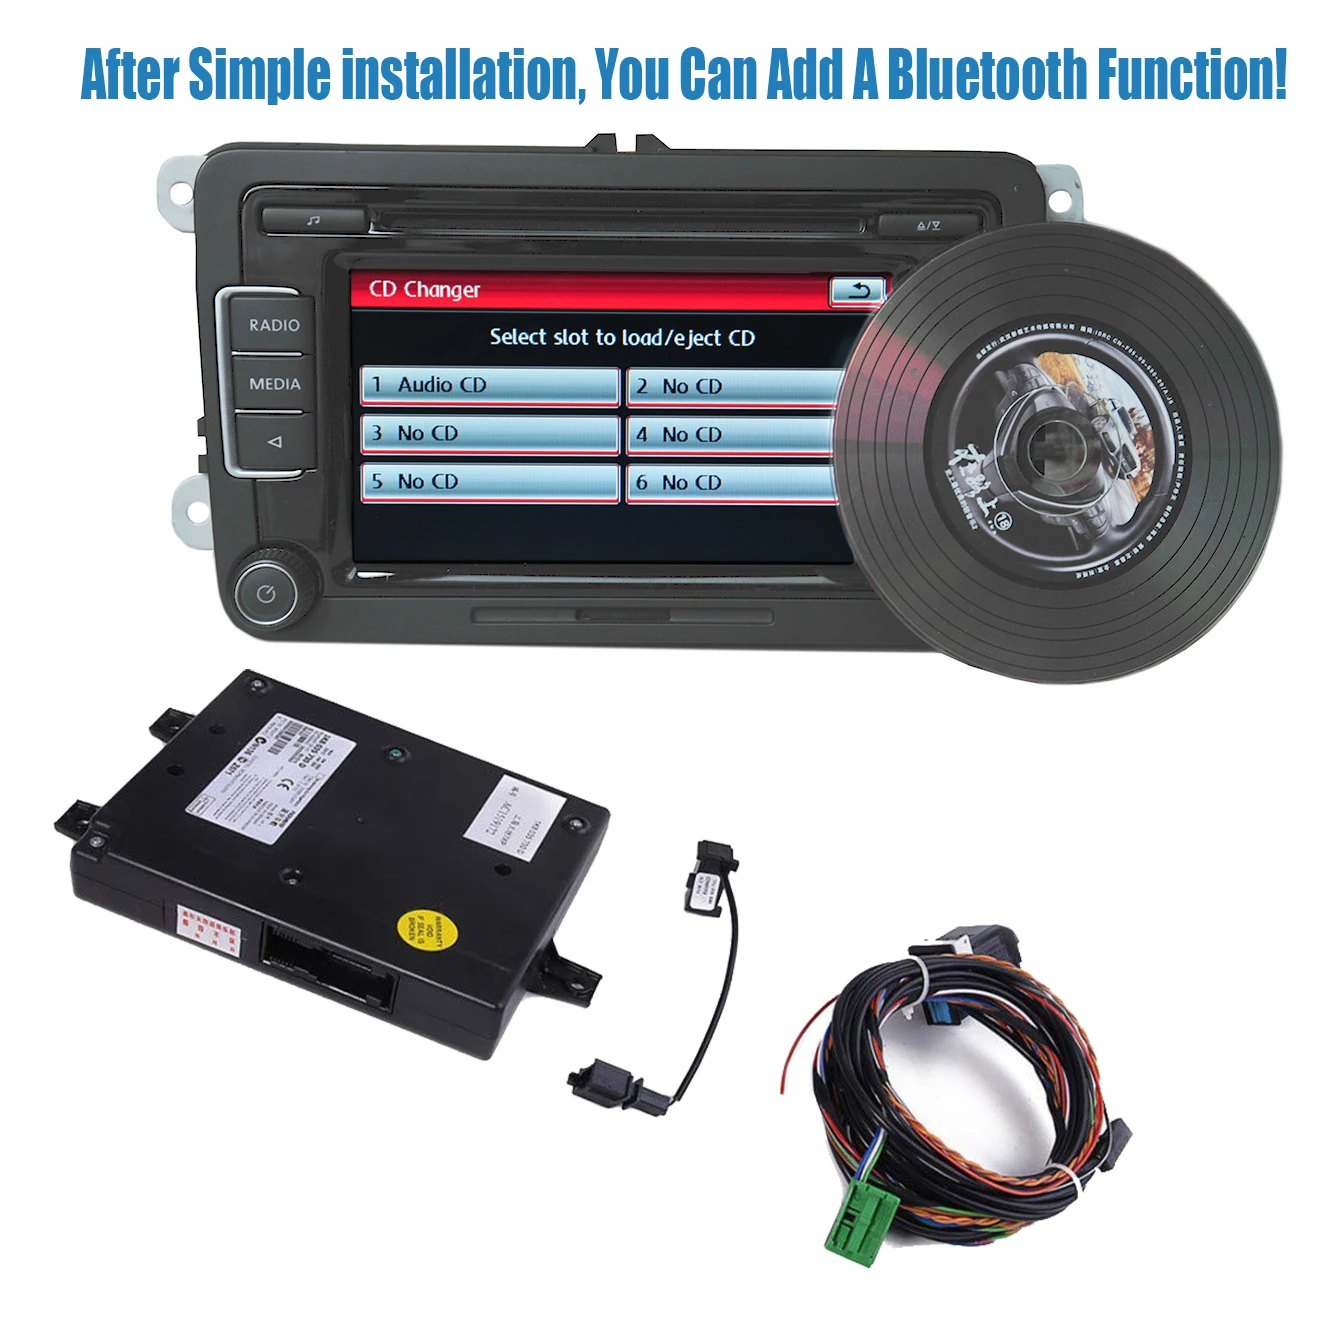 VW TOURAN Bluetooth car radio complete upgrade package USB AUX KW-R920BT 